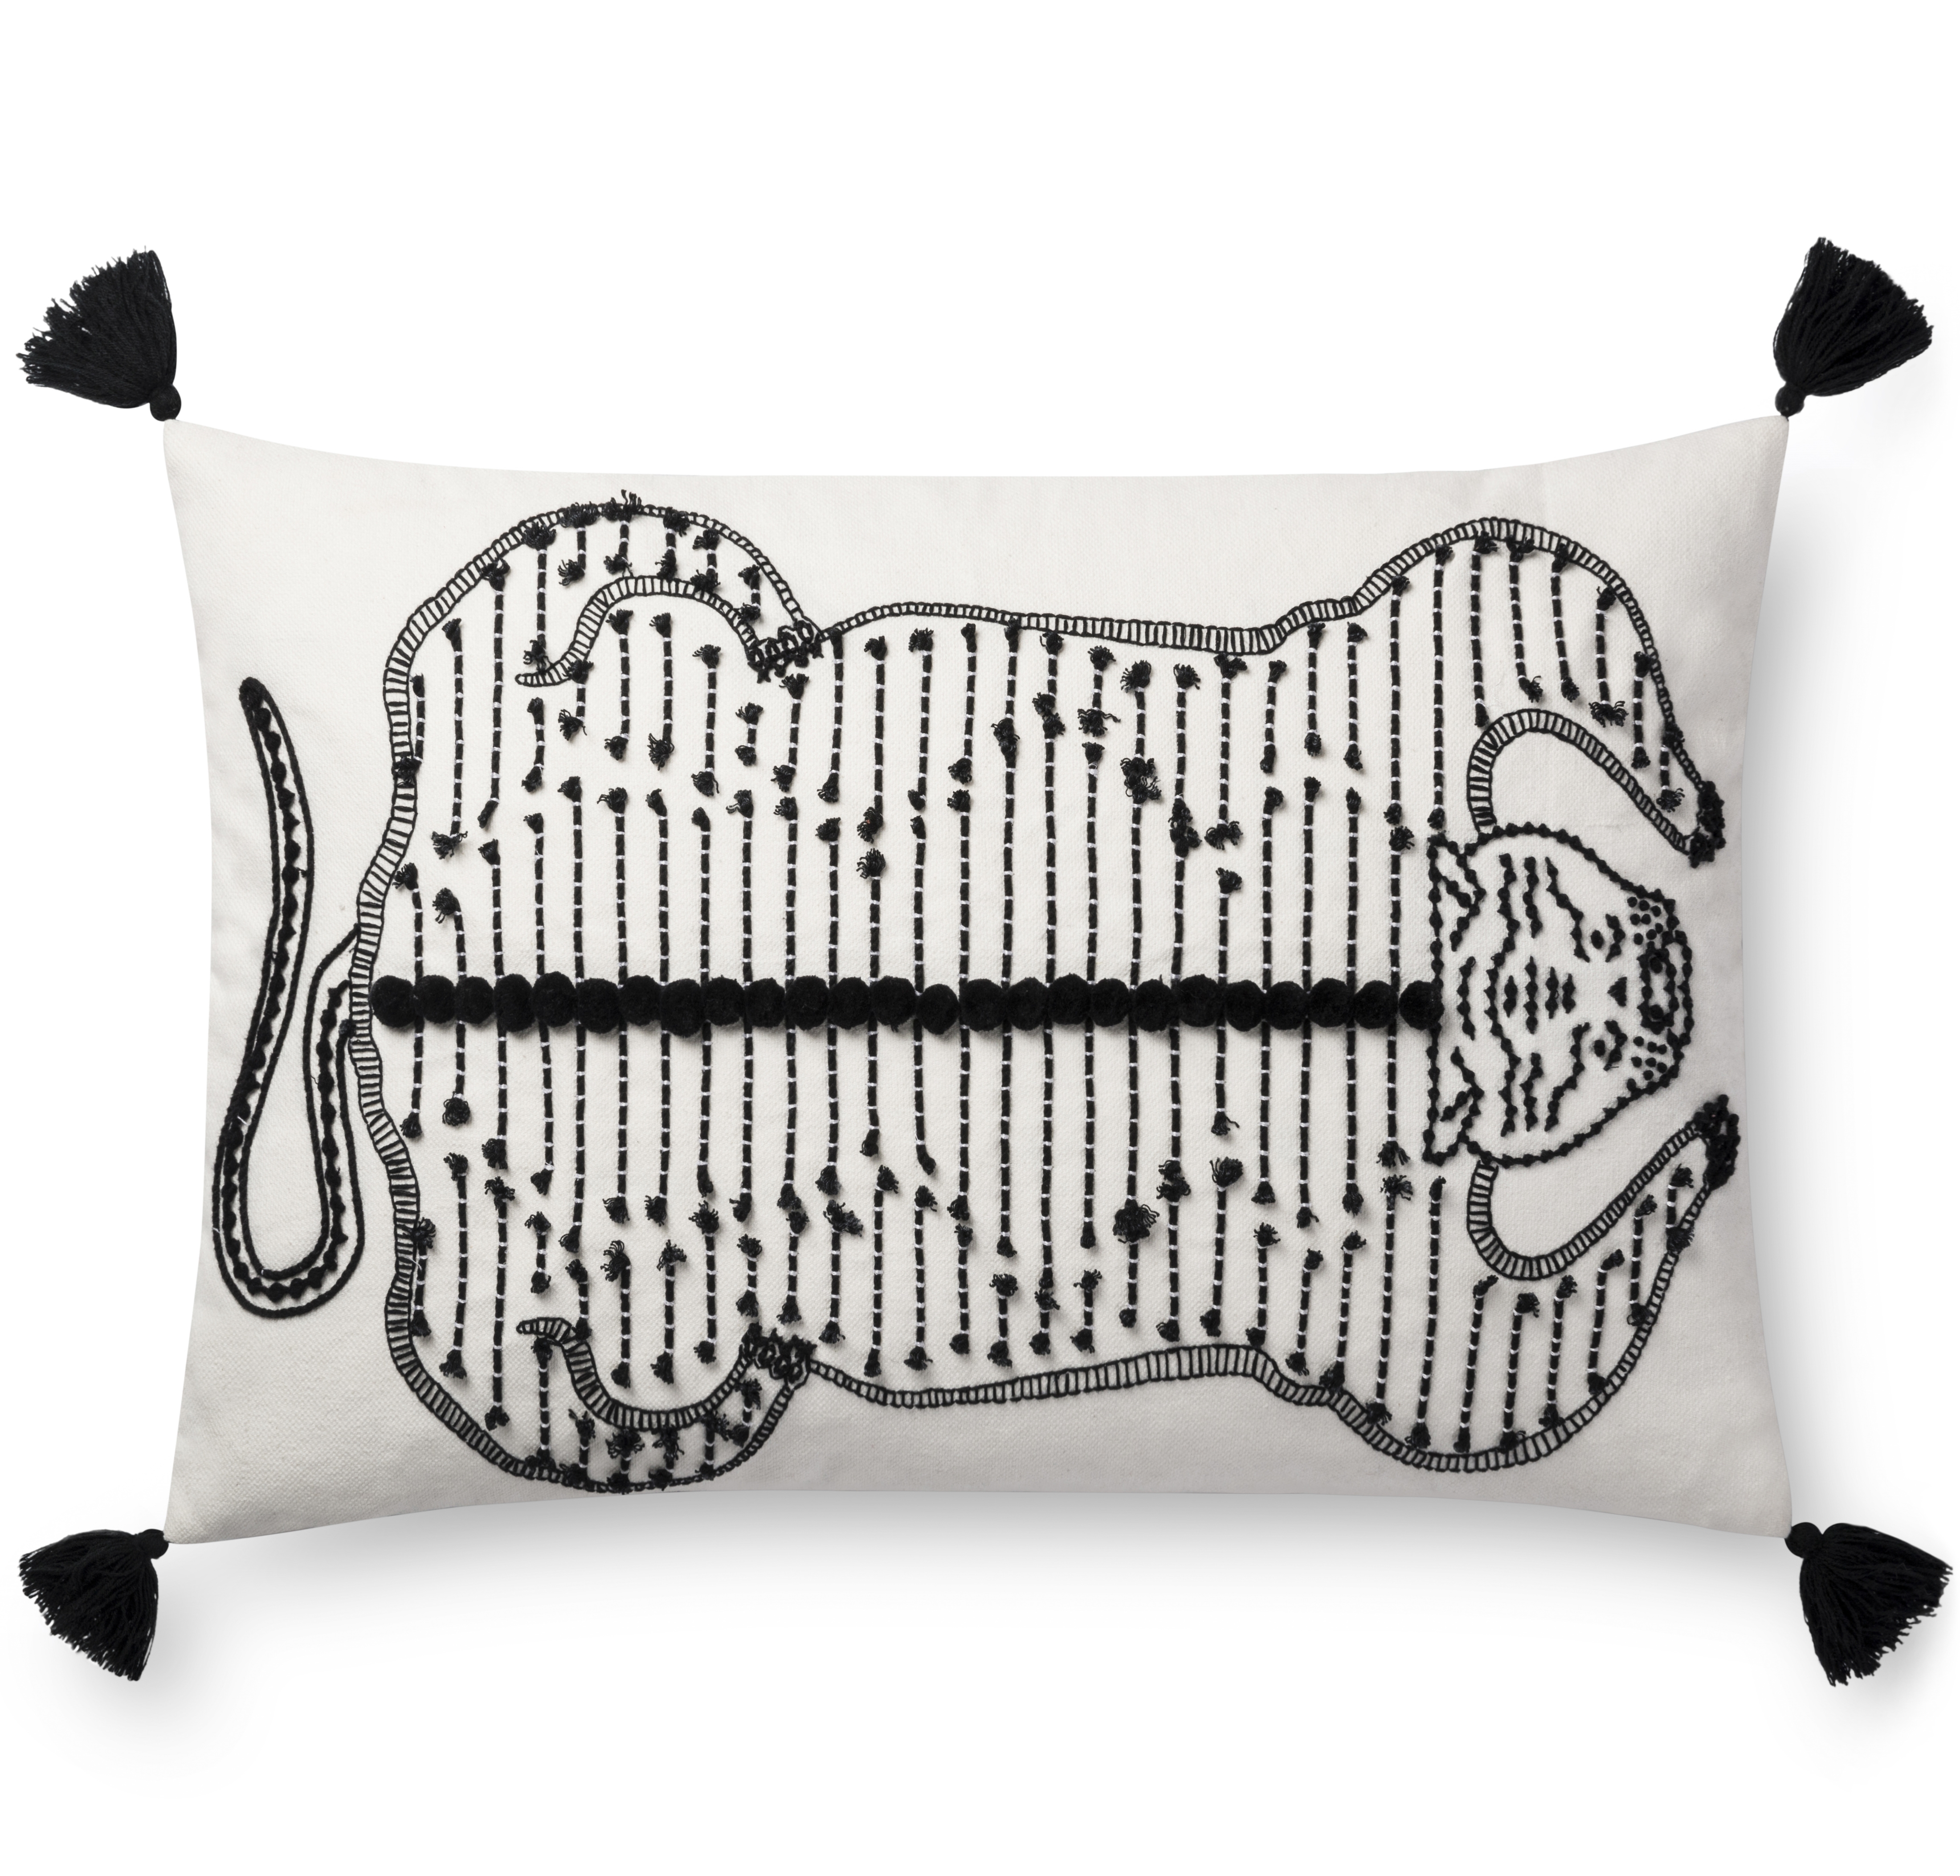 Throw Pillow Cover with Tassels, White & Black, 26" x 16" - Image 0